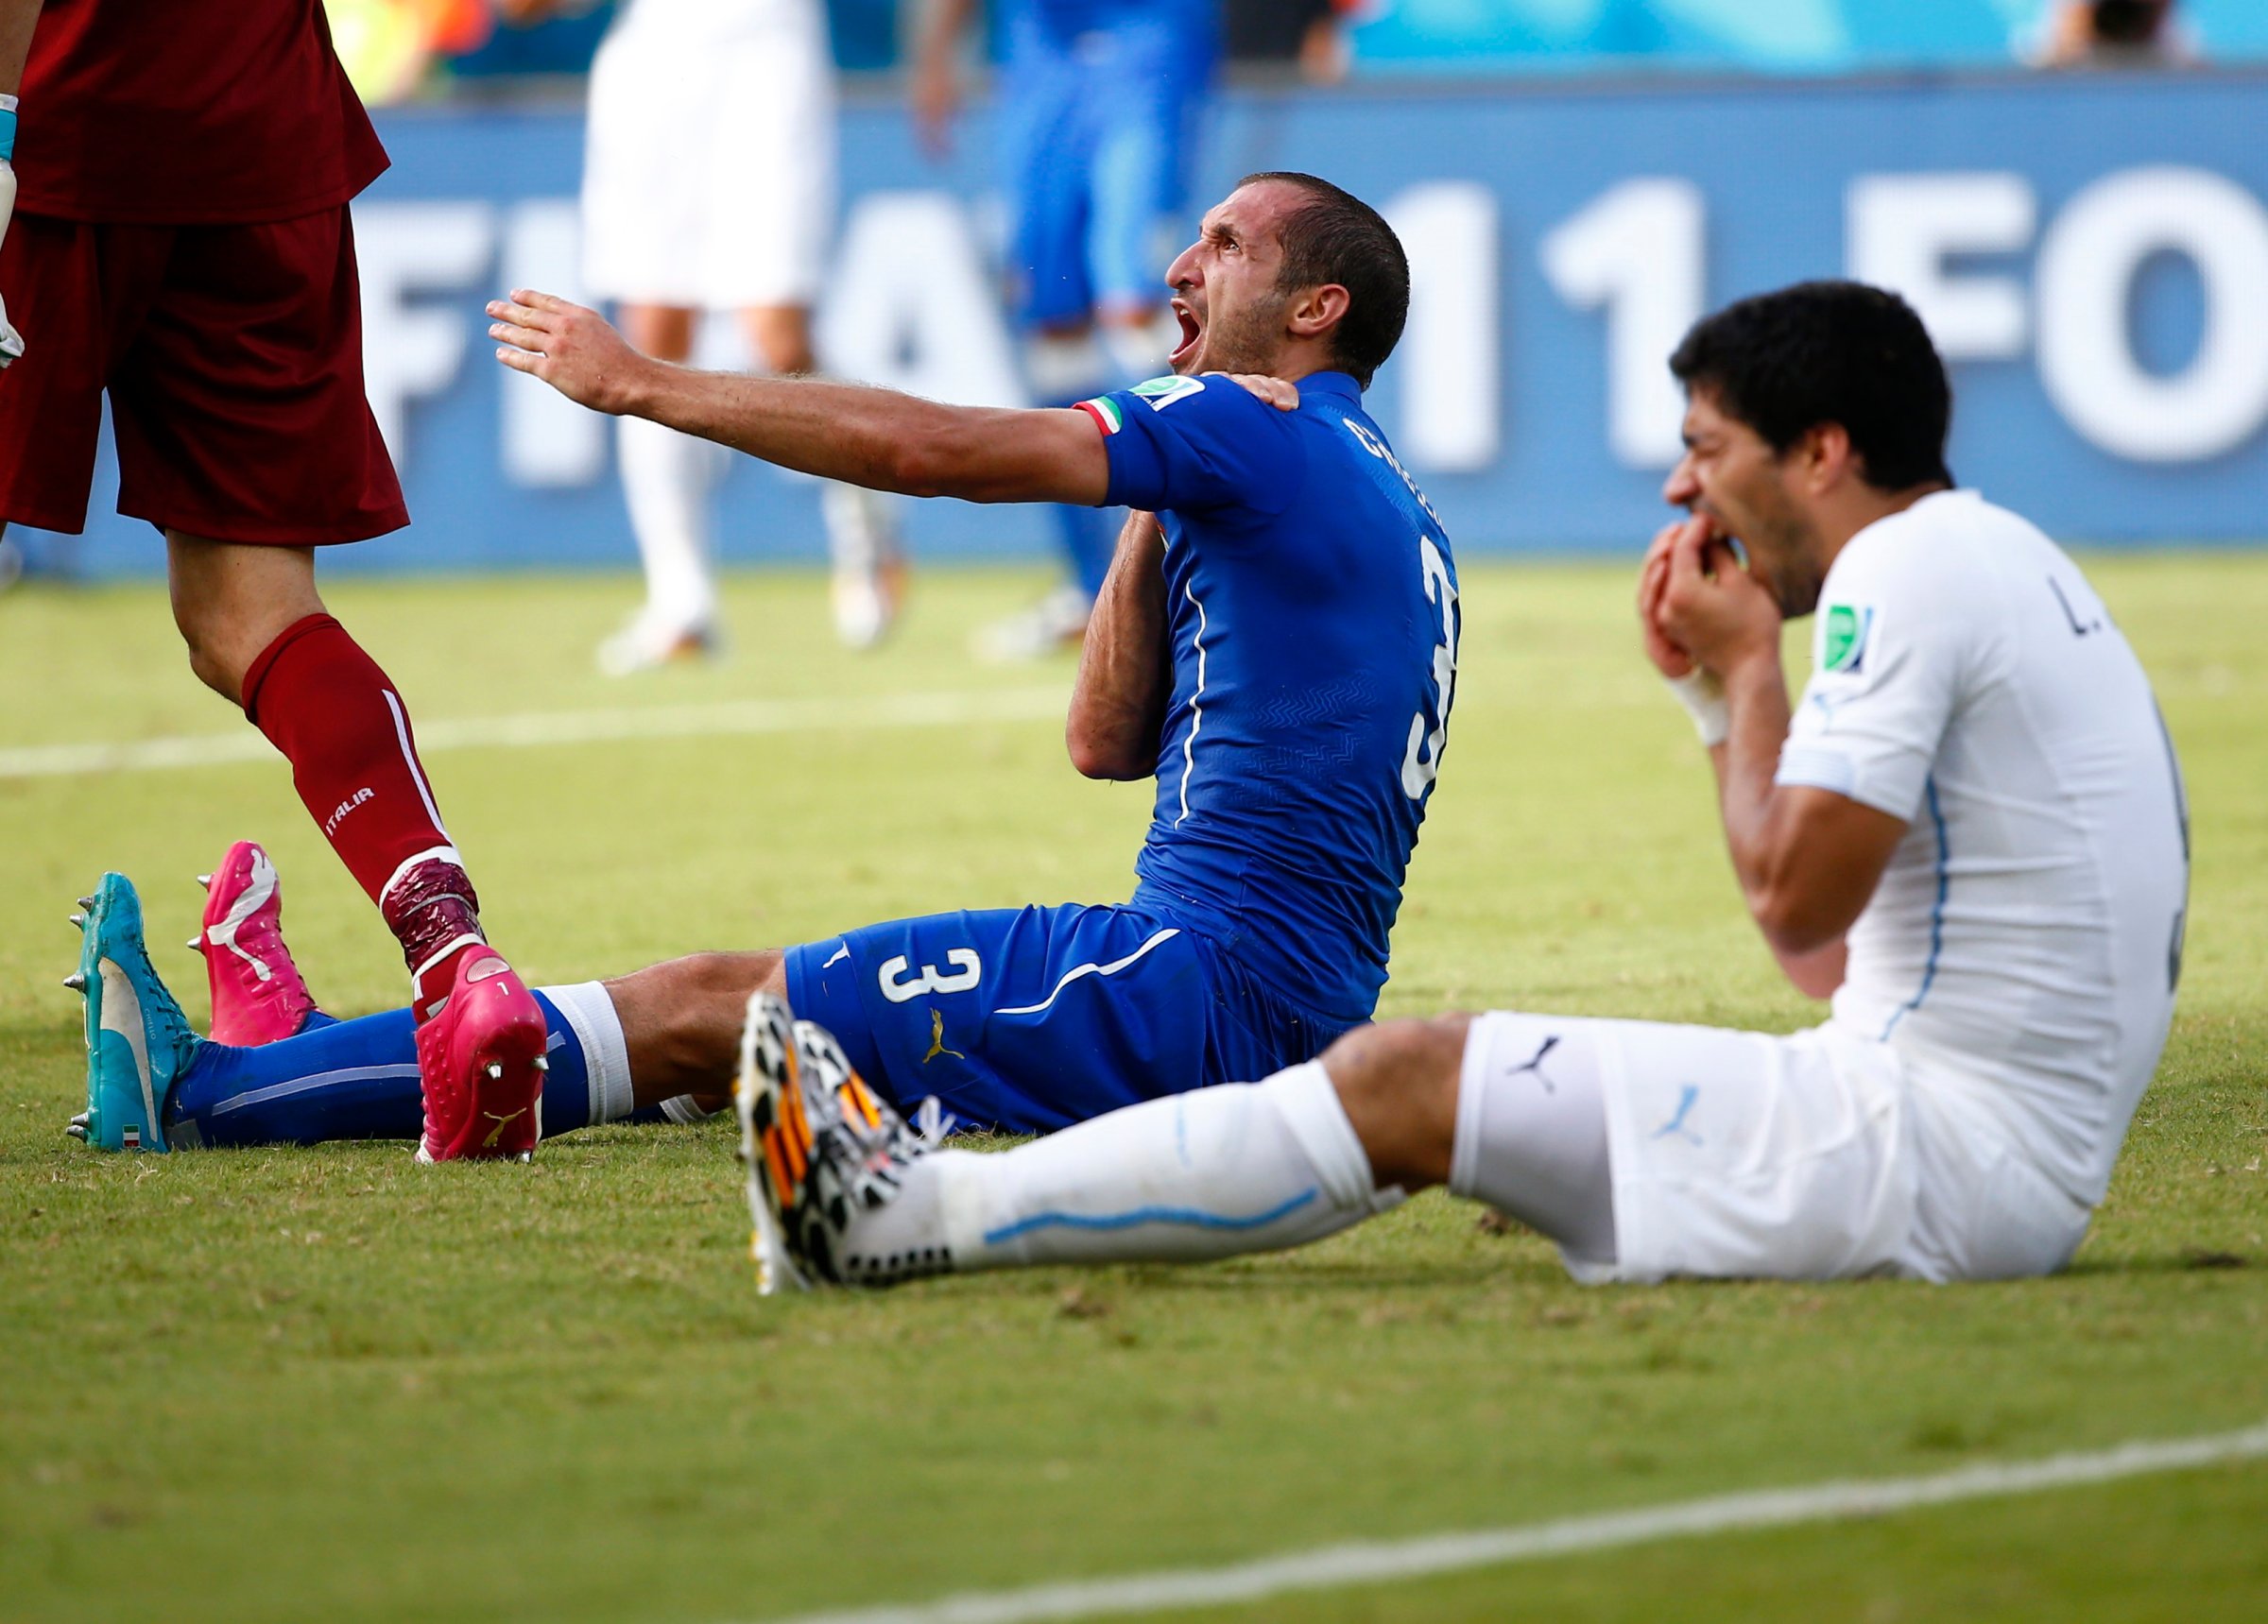 Uruguay's Luis Suarez reacts after clashing with Italy's Giorgio Chiellini during their 2014 World Cup Group D soccer match at the Dunas arena in Natal